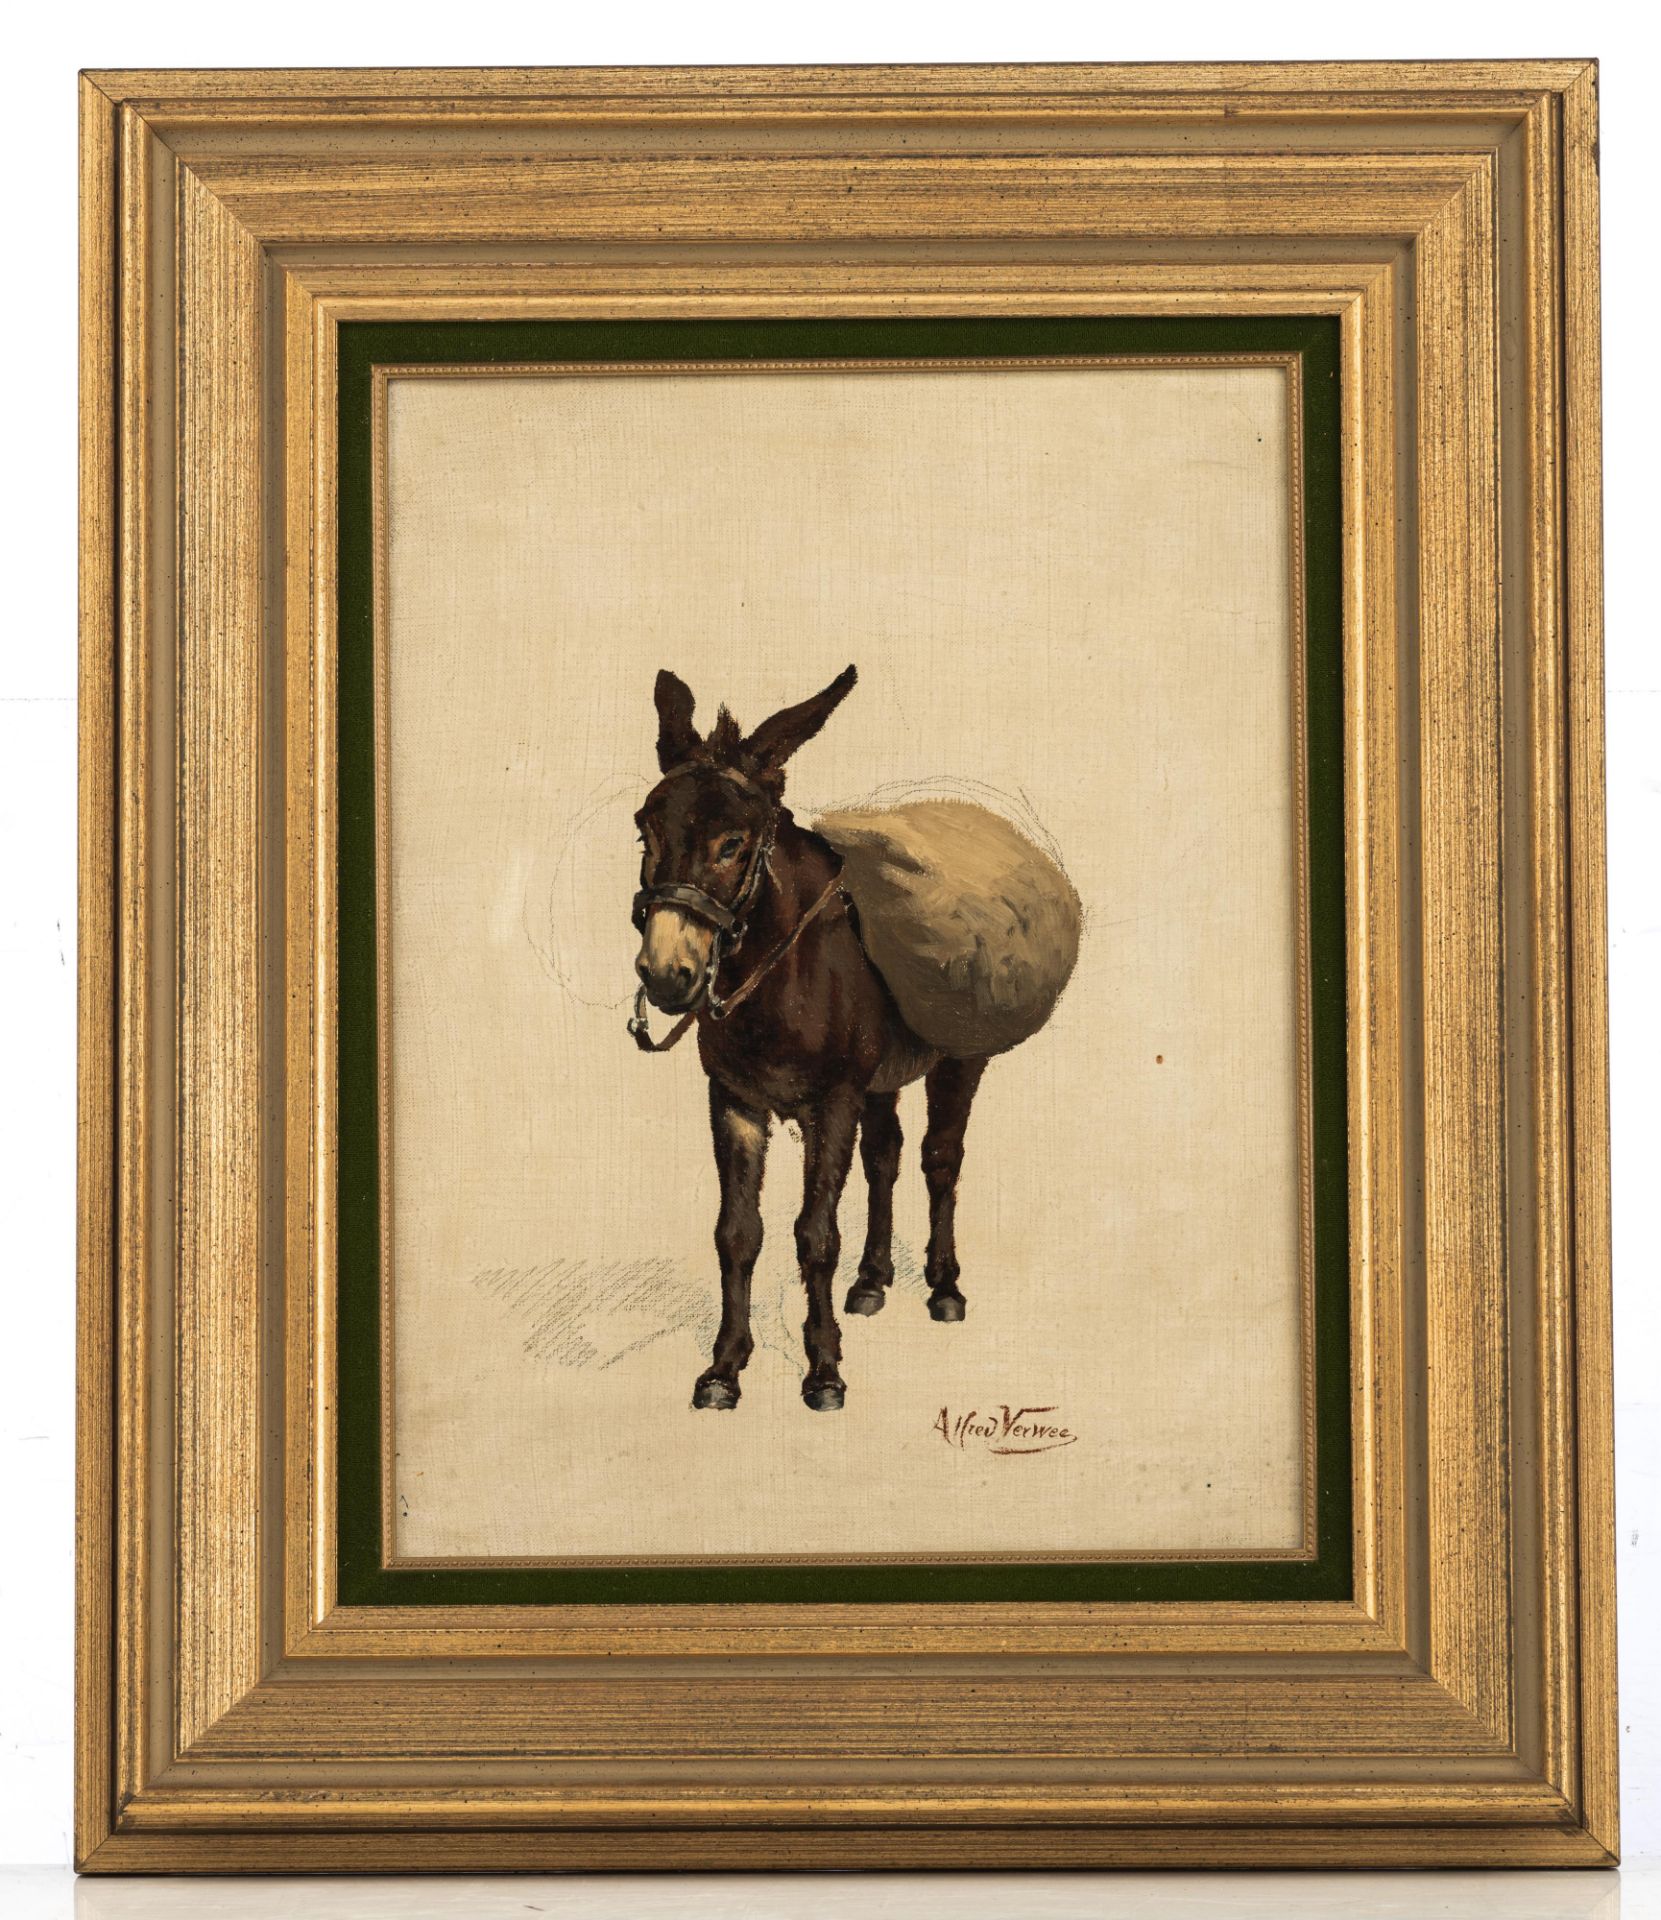 Verwee A., the packed donkey, an oil and pencil sketch on canvas, 27,5 x 35,5 cm - Bild 2 aus 7